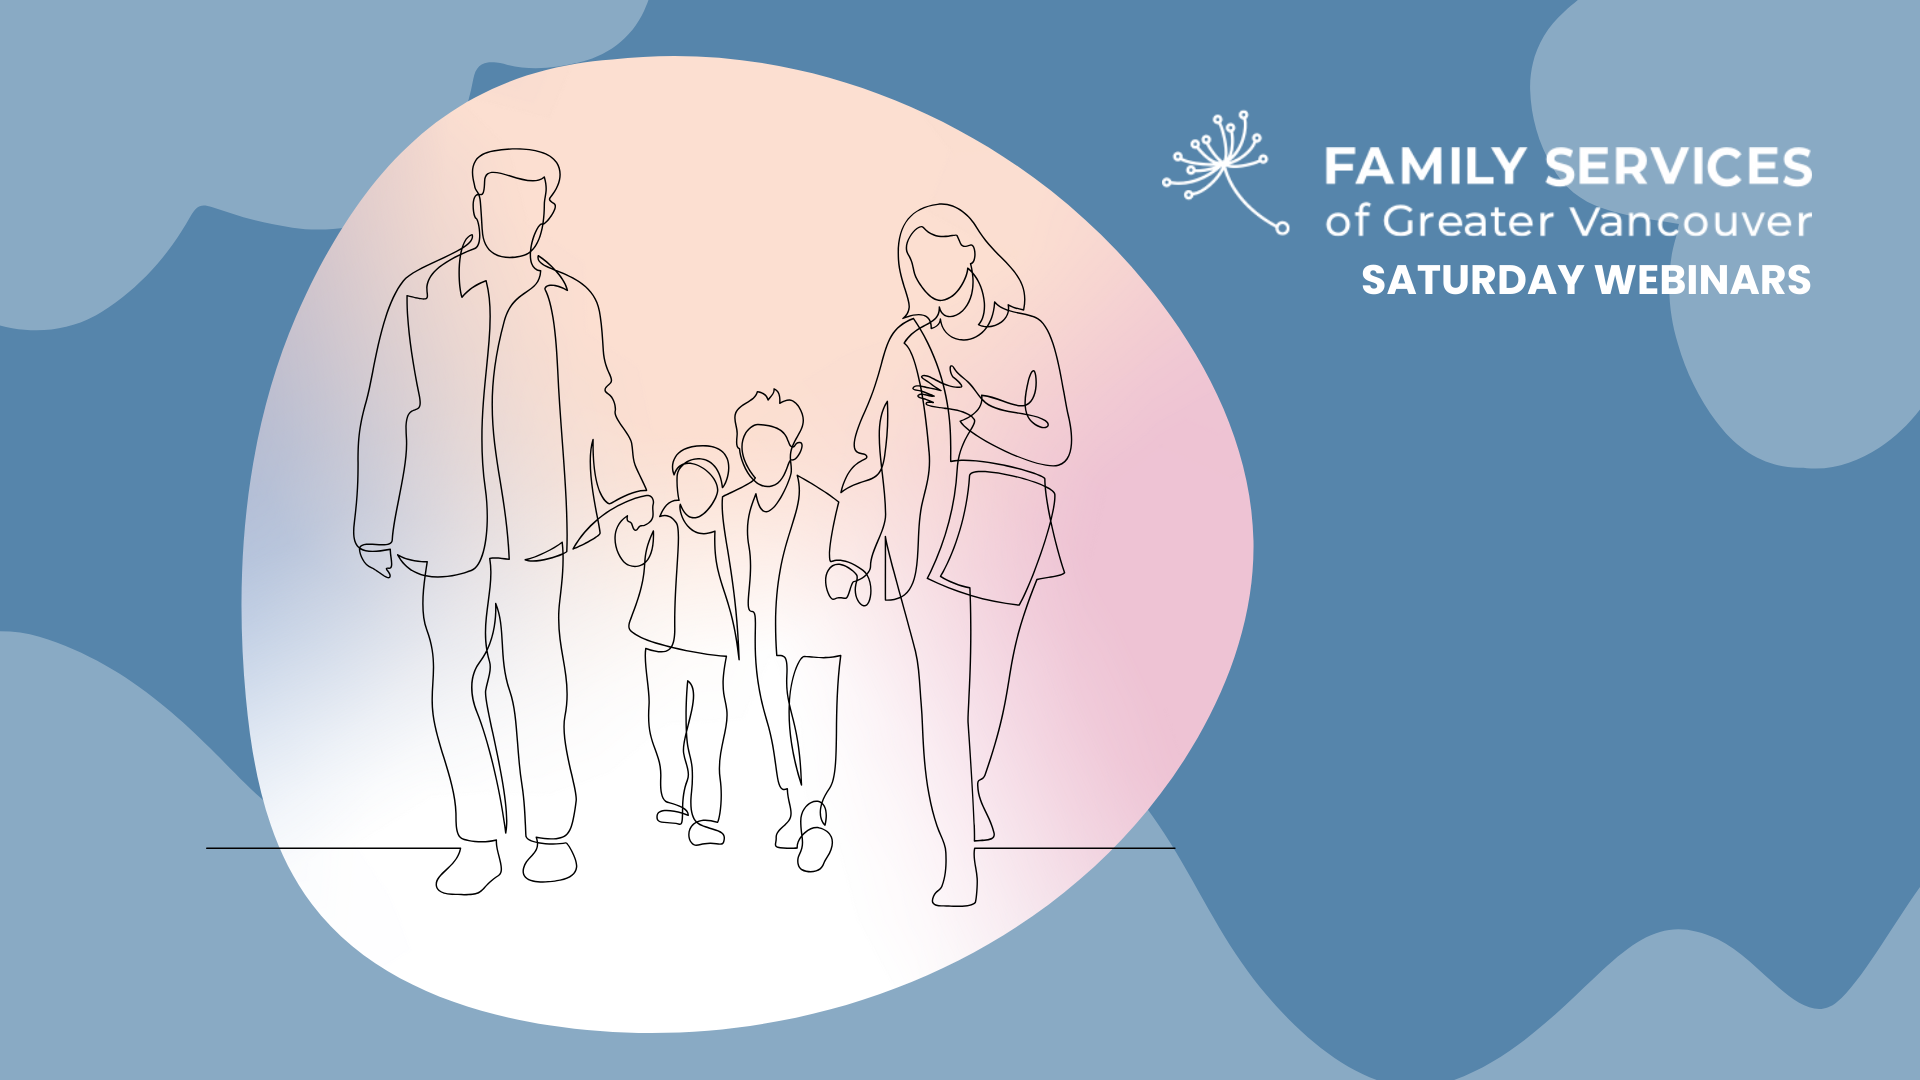 Cornflower blue background. A linear drawing of a family holding hands on the left, the Family Services of Greater Vancouver logo on the top right, and the text Saturday webinars underneath.